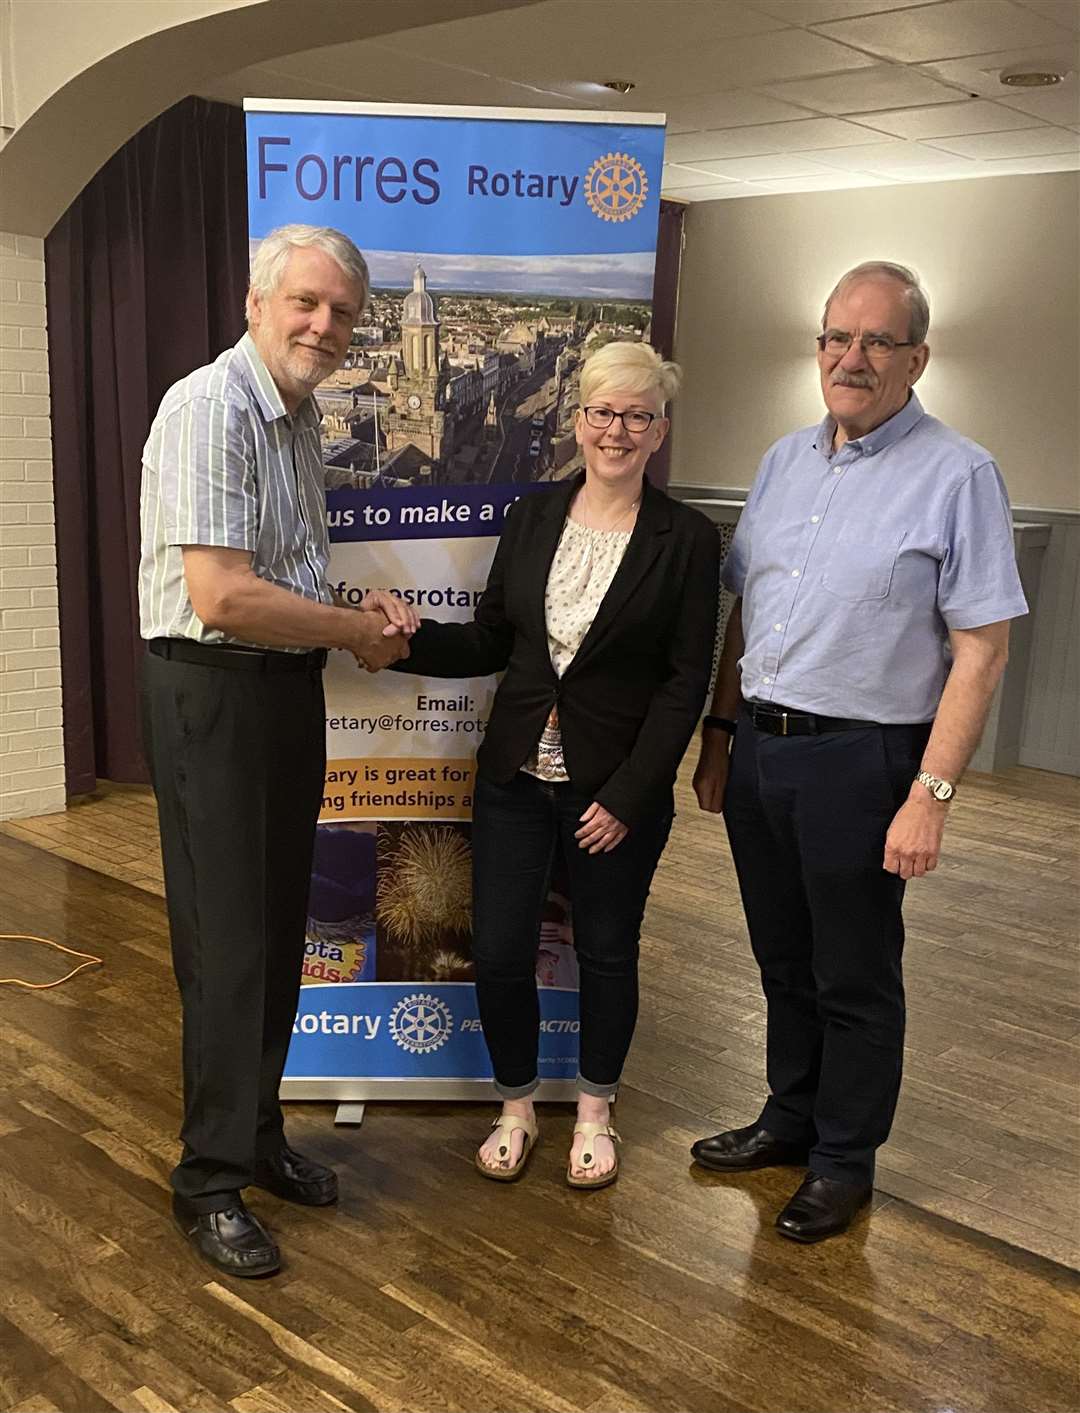 Forres president elect Brian Higg and Ken McLennan (right) welcoming new member Suzie de-Vry to the Rotary. Ken will take up his role as district governor for District 1010 Scotland North on July 1.